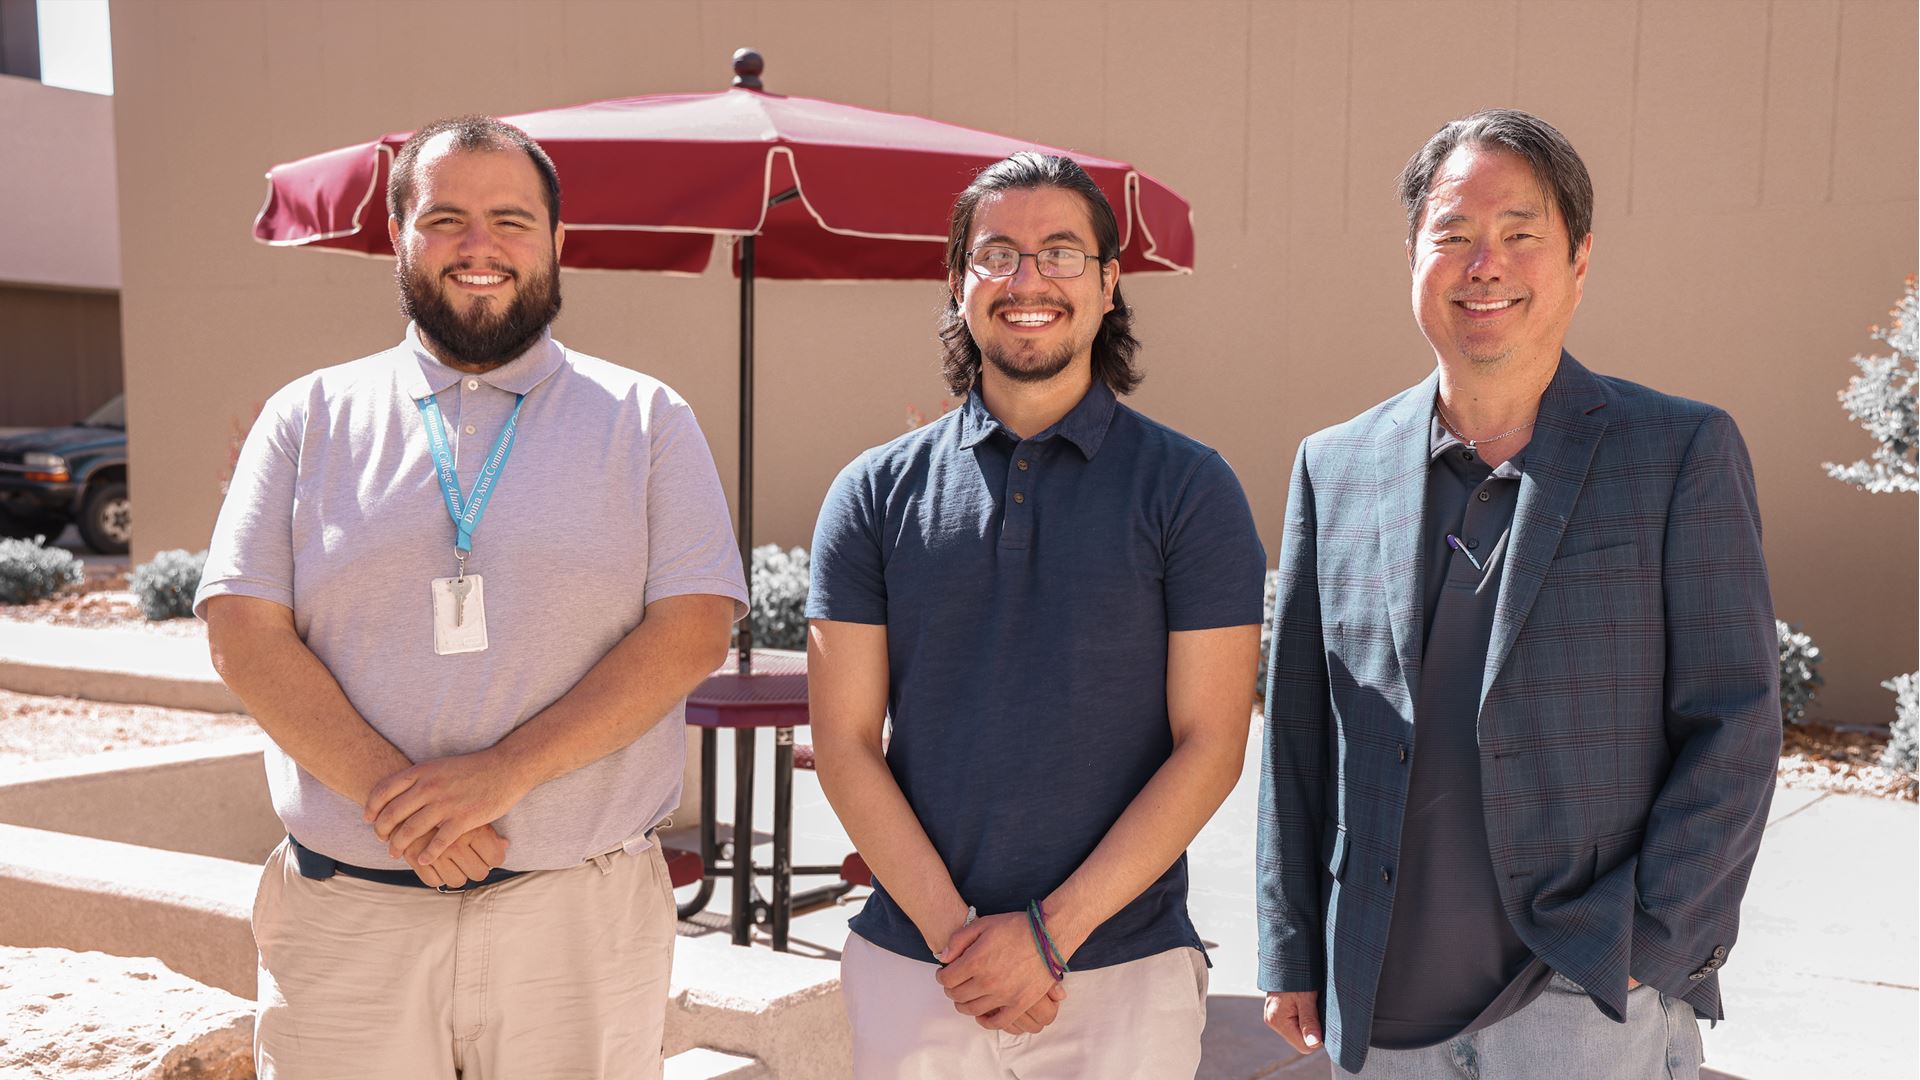 Future NMSU students to participate in SkillsUSA cybersecurity competition June 19 23